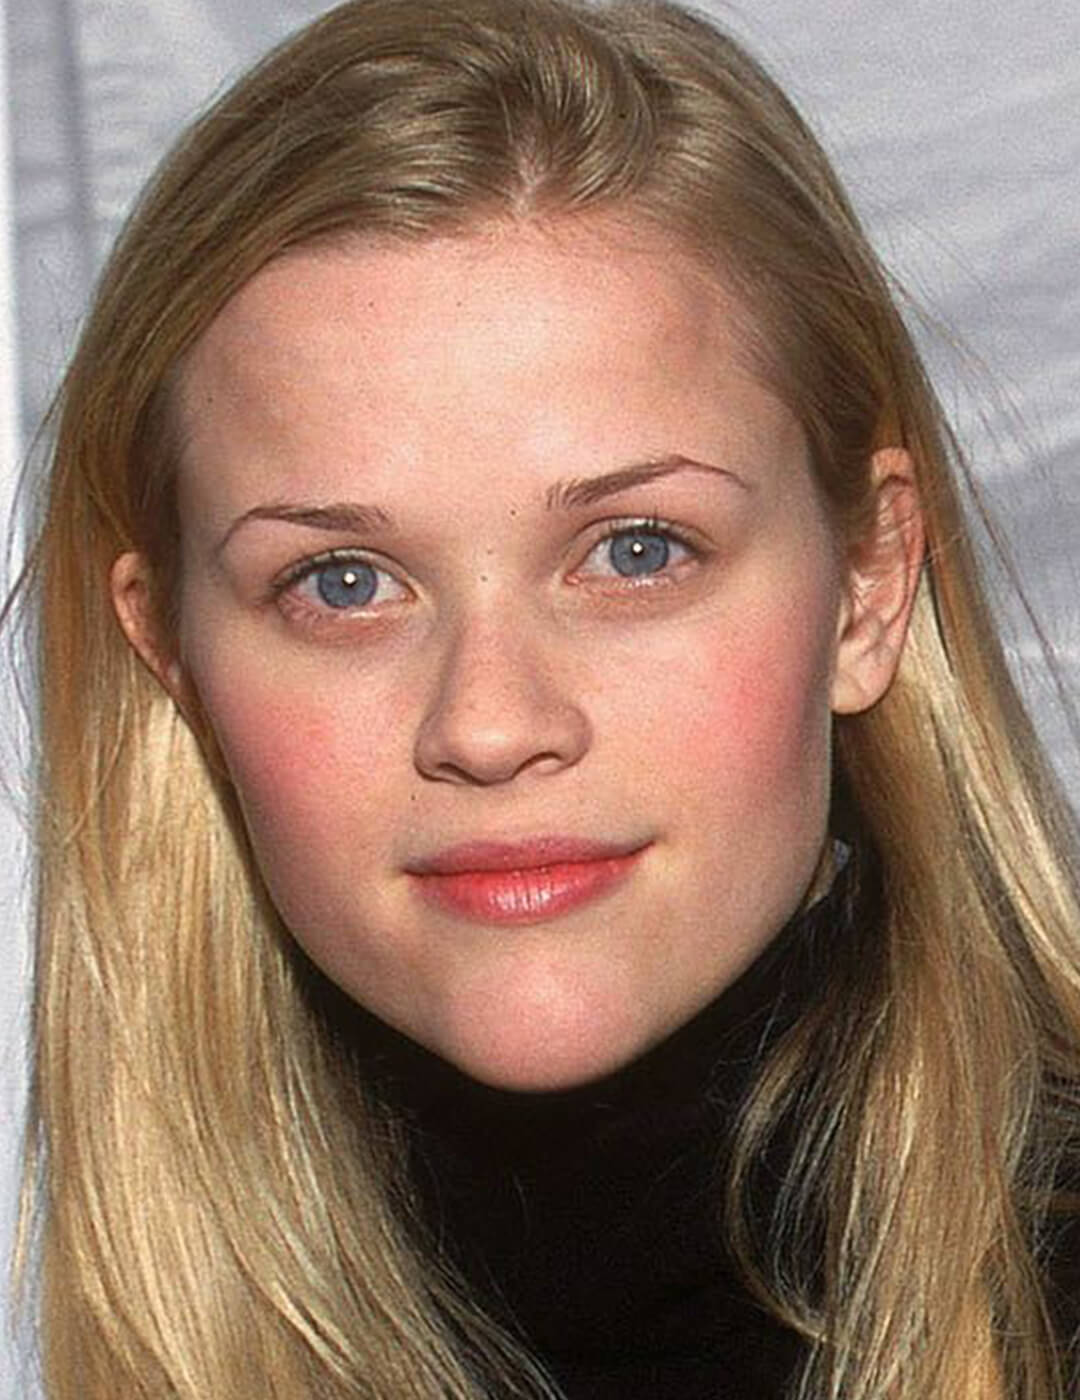 Younger Reese Witherspoon rocking minimal makeup with bright blush